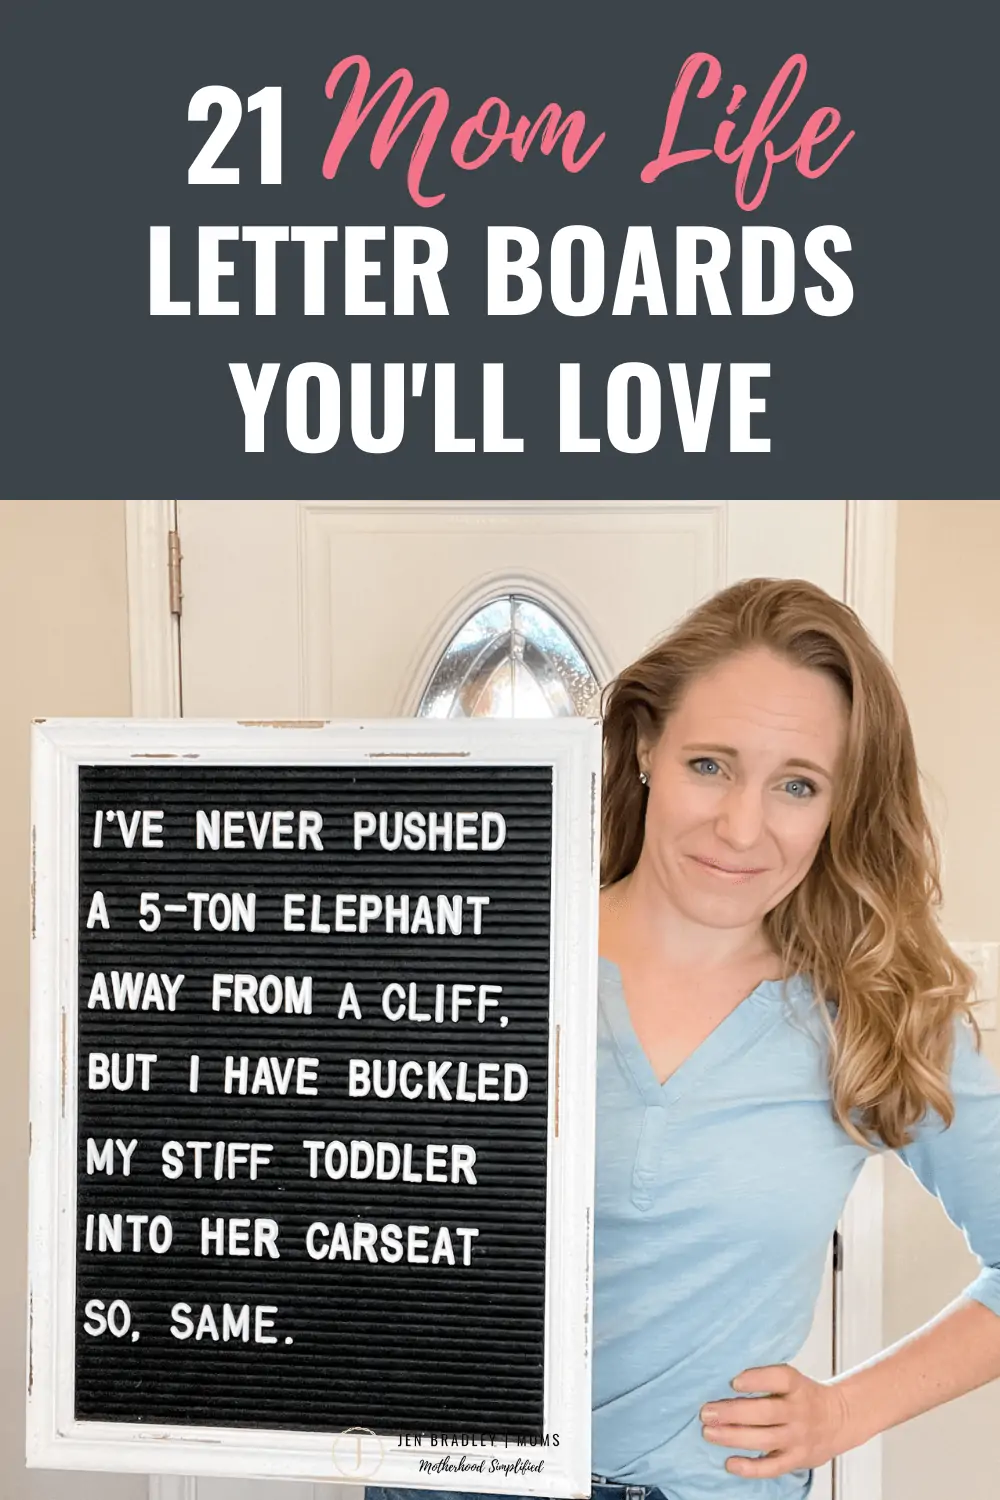 21 Funny Letter Board Quotes Perfect for Your Mom Life